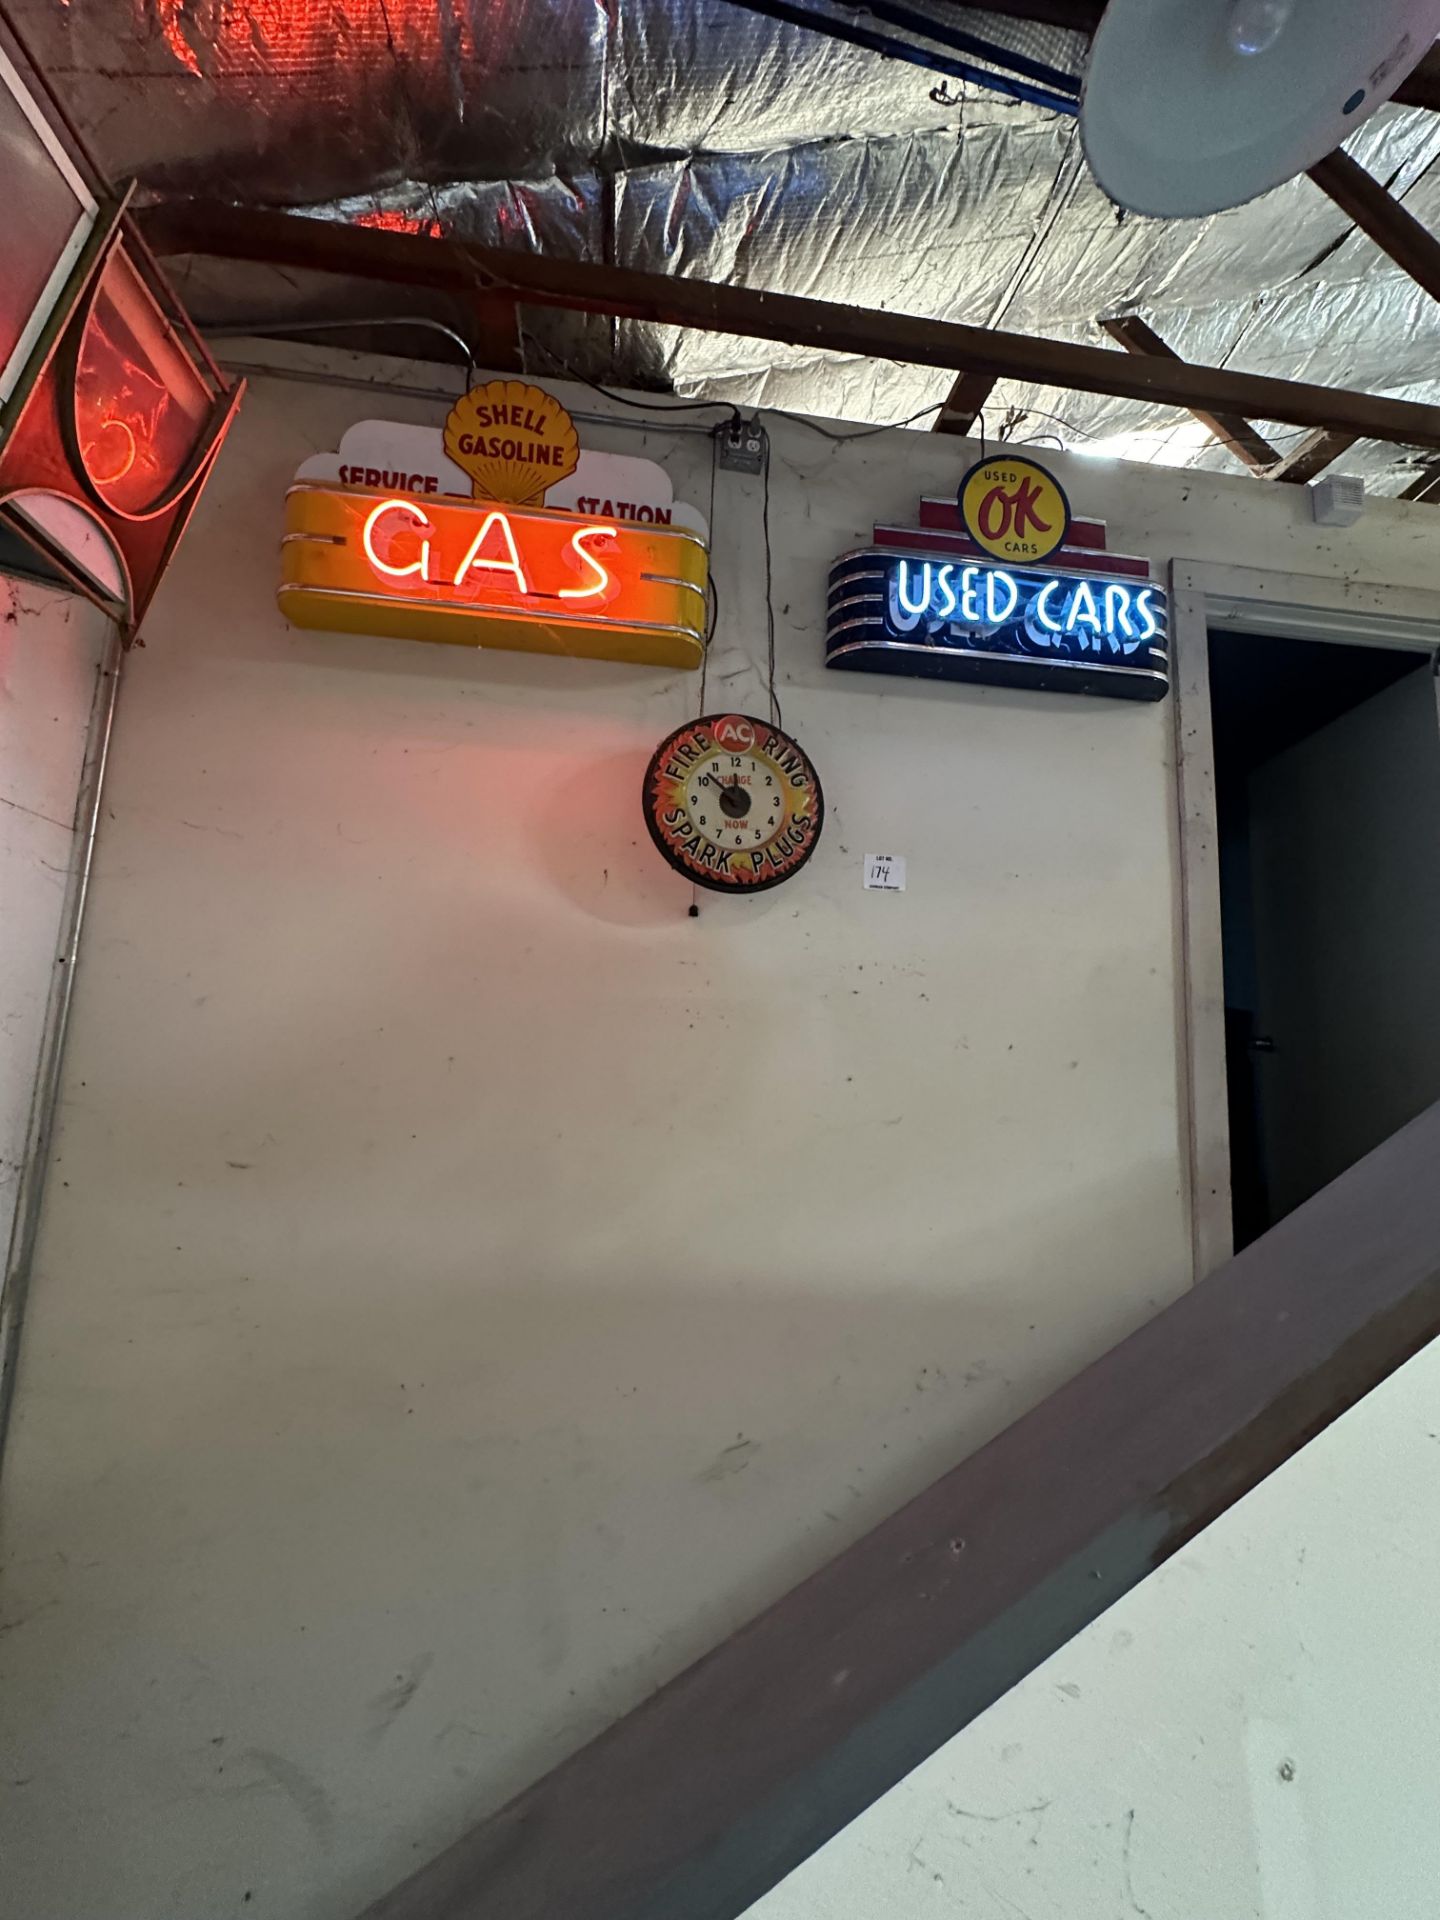 Hamms, shell gas, ace clock used ok cars neon signs